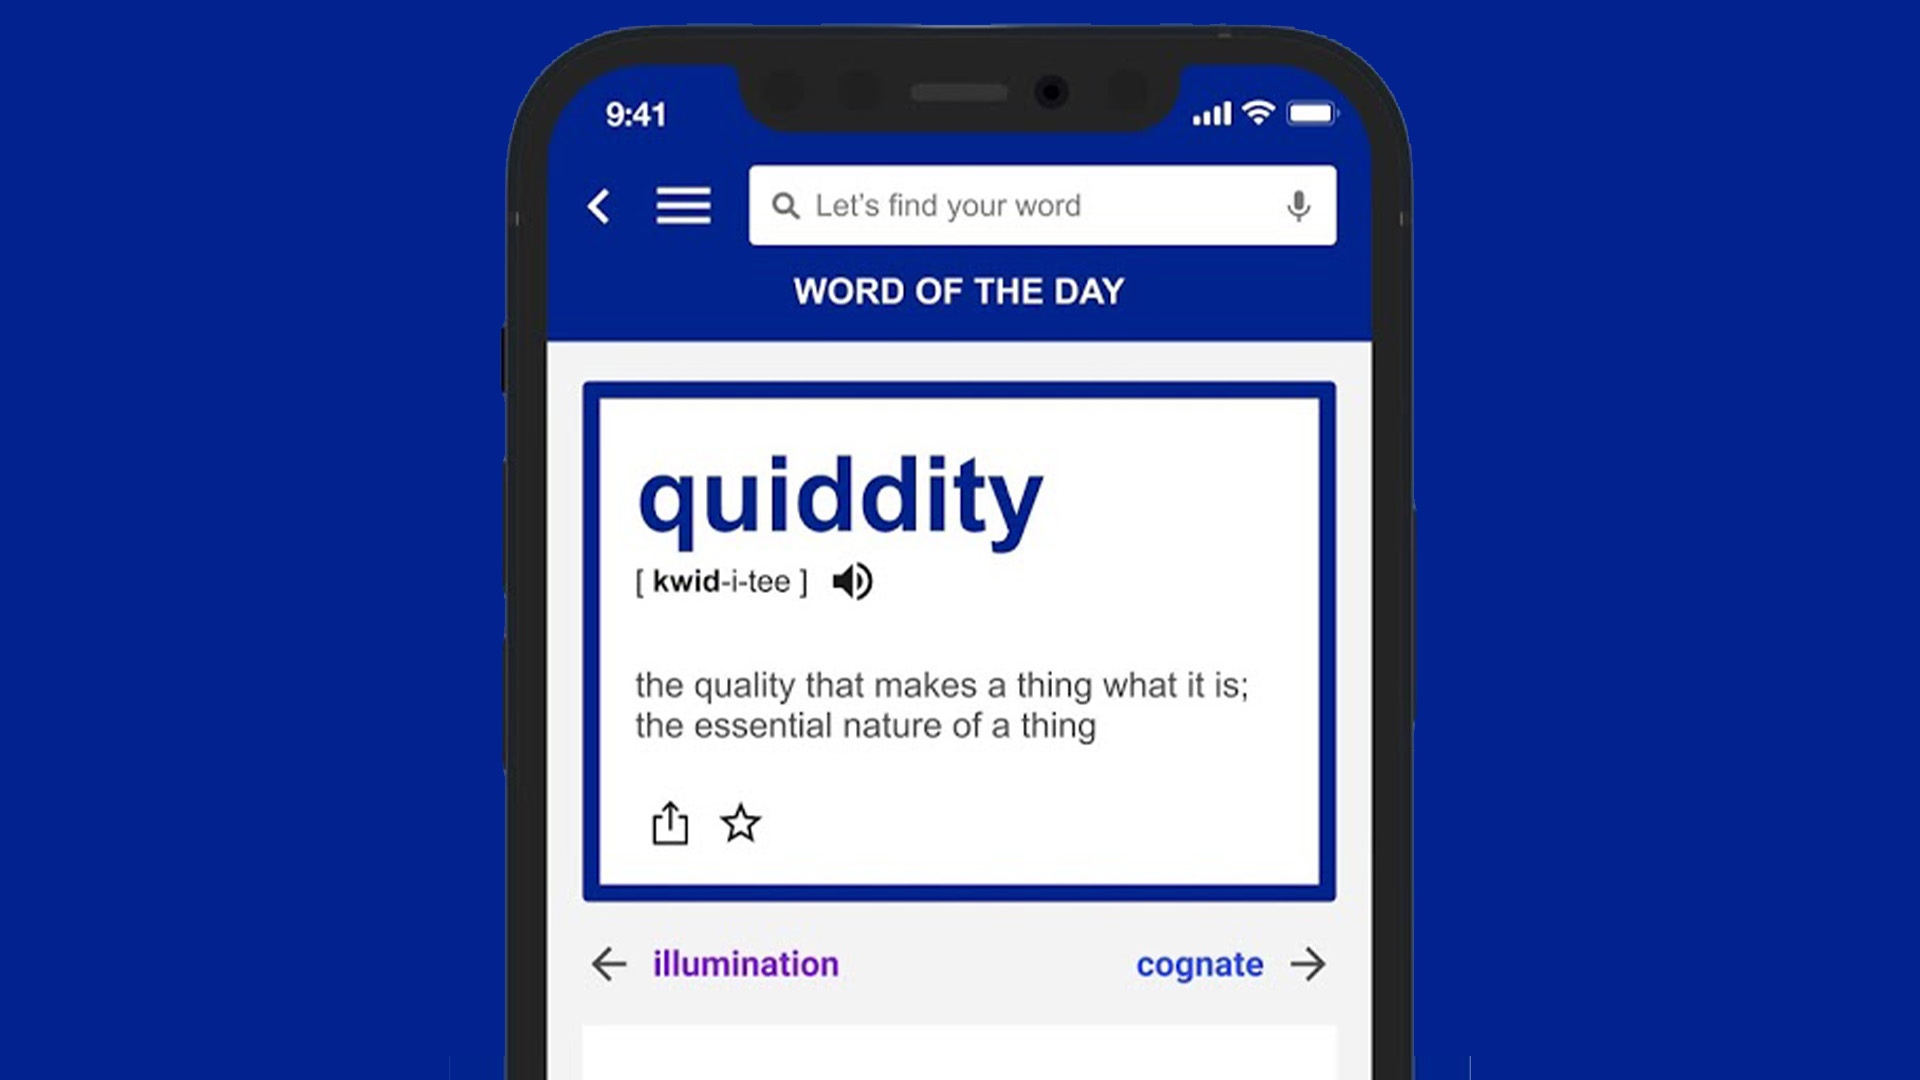 The dictionary for Android - Android Authority